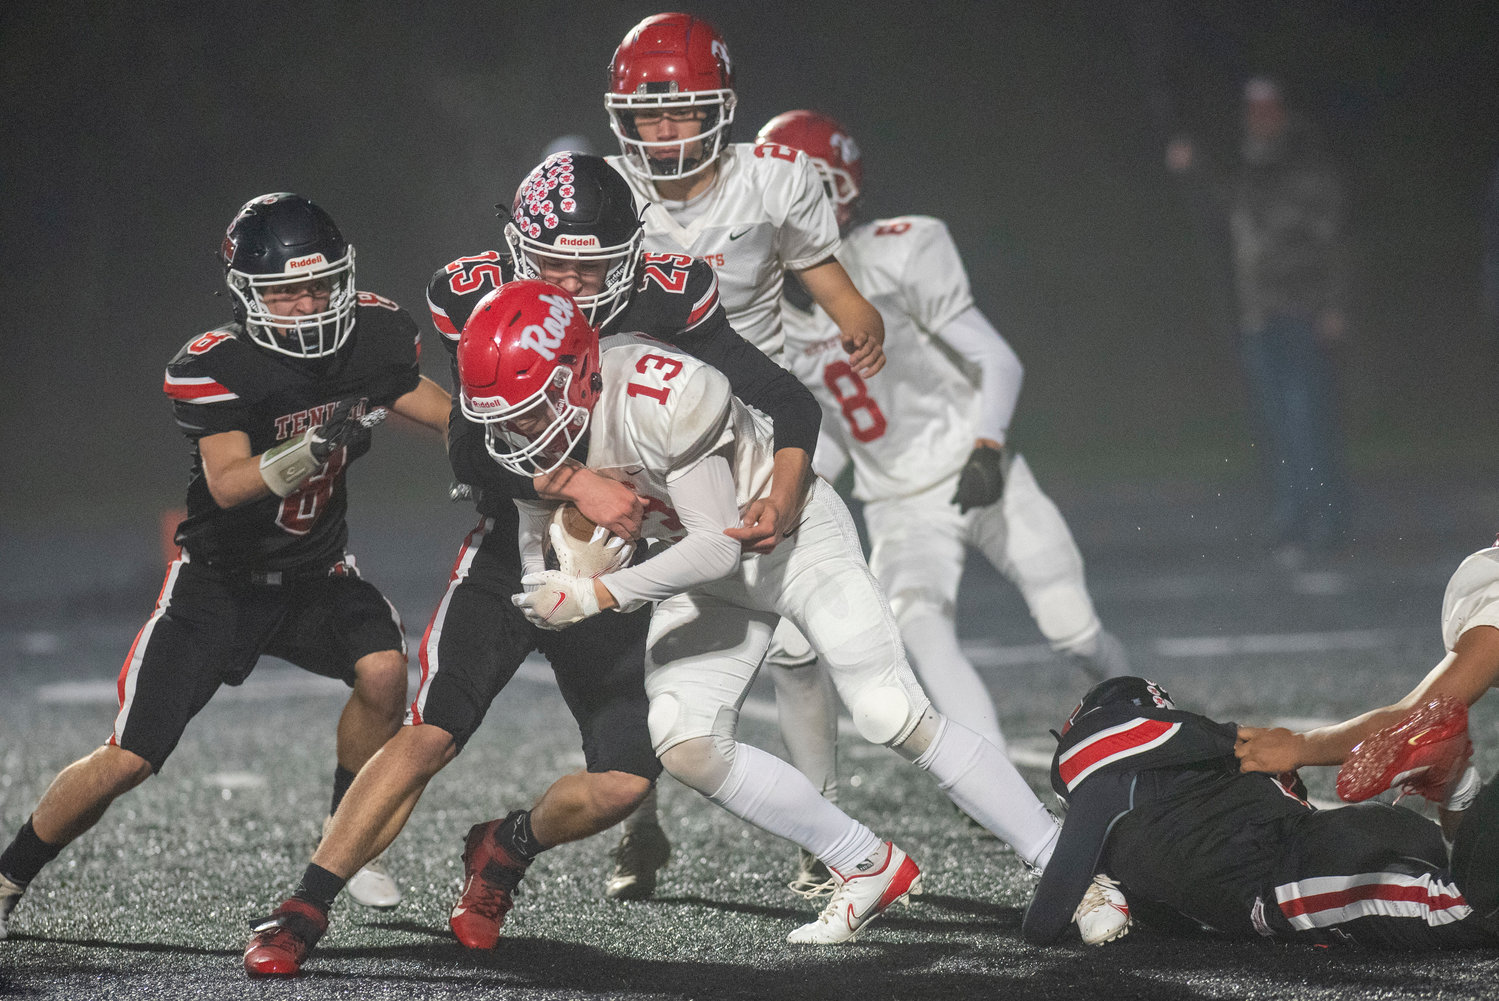 Tenino's Brody Noonan (25) tackles Castle Rock's Hayden Curtiss (13) during a district playoff game Friday, Nov. 5.